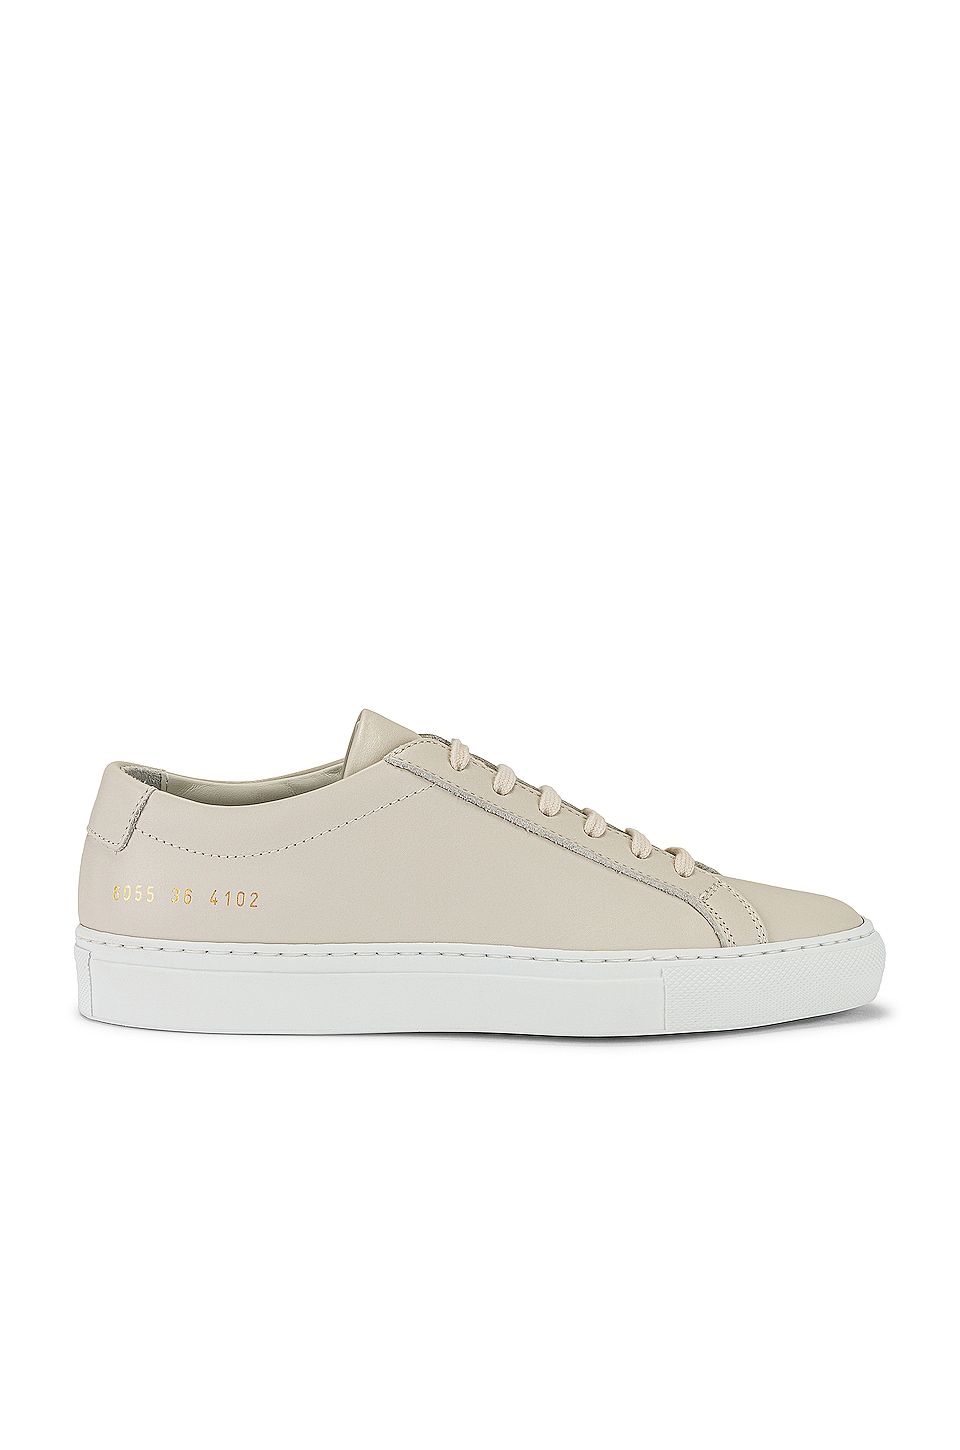 Common Projects Achilles White Sole Sneaker in Off White | REVOLVE